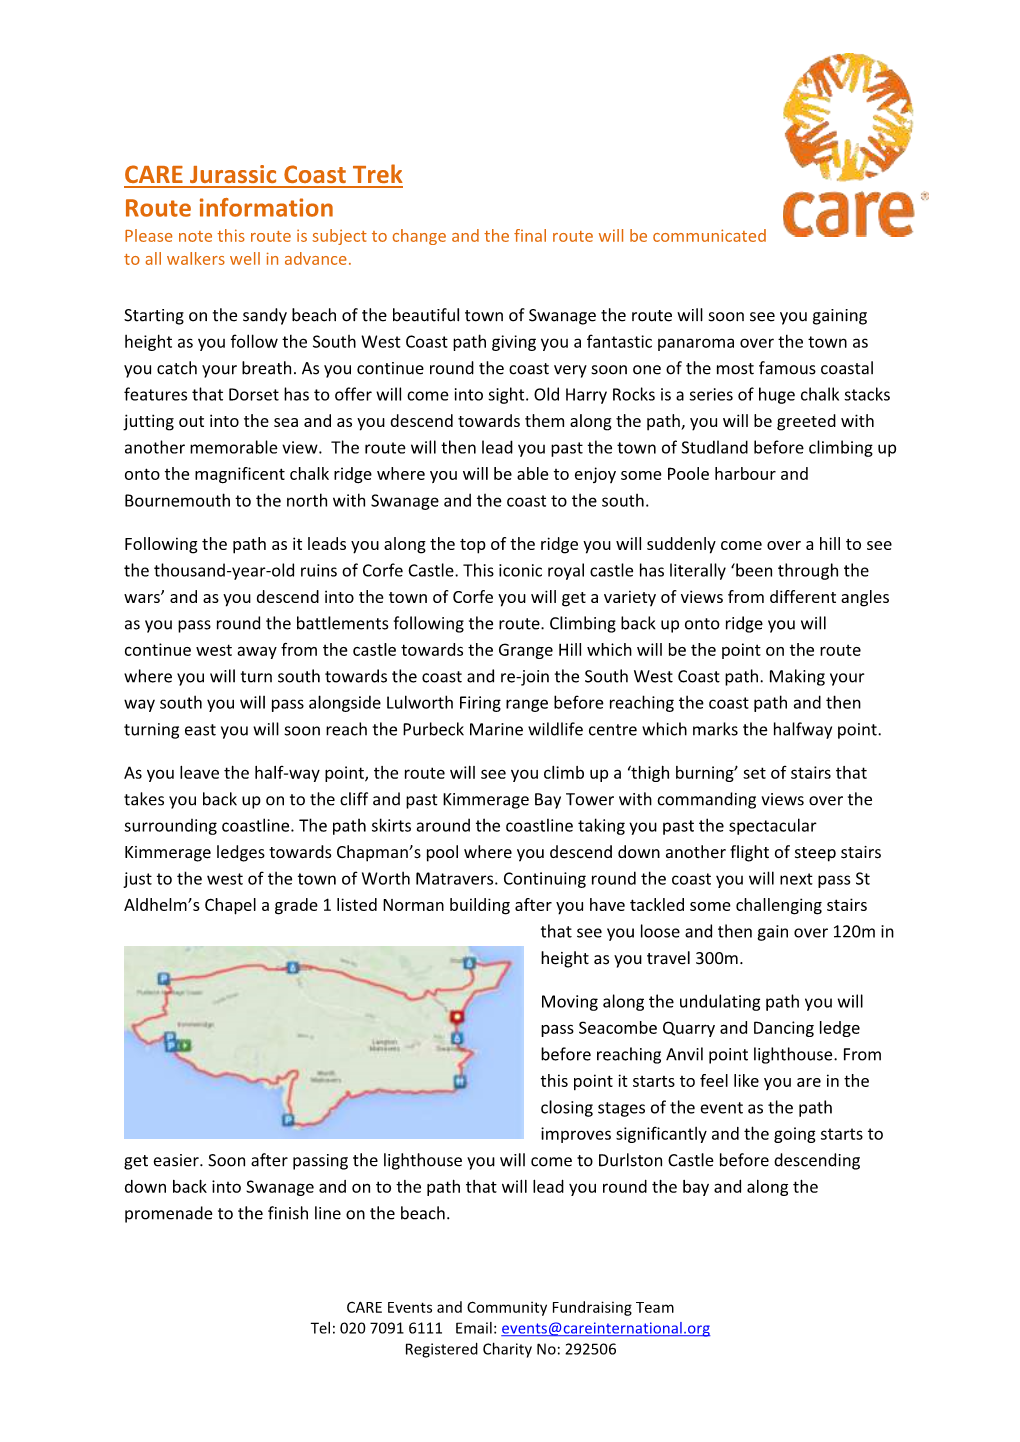 CARE Jurassic Coast Trek Route Information Please Note This Route Is Subject to Change and the Final Route Will Be Communicated to All Walkers Well in Advance